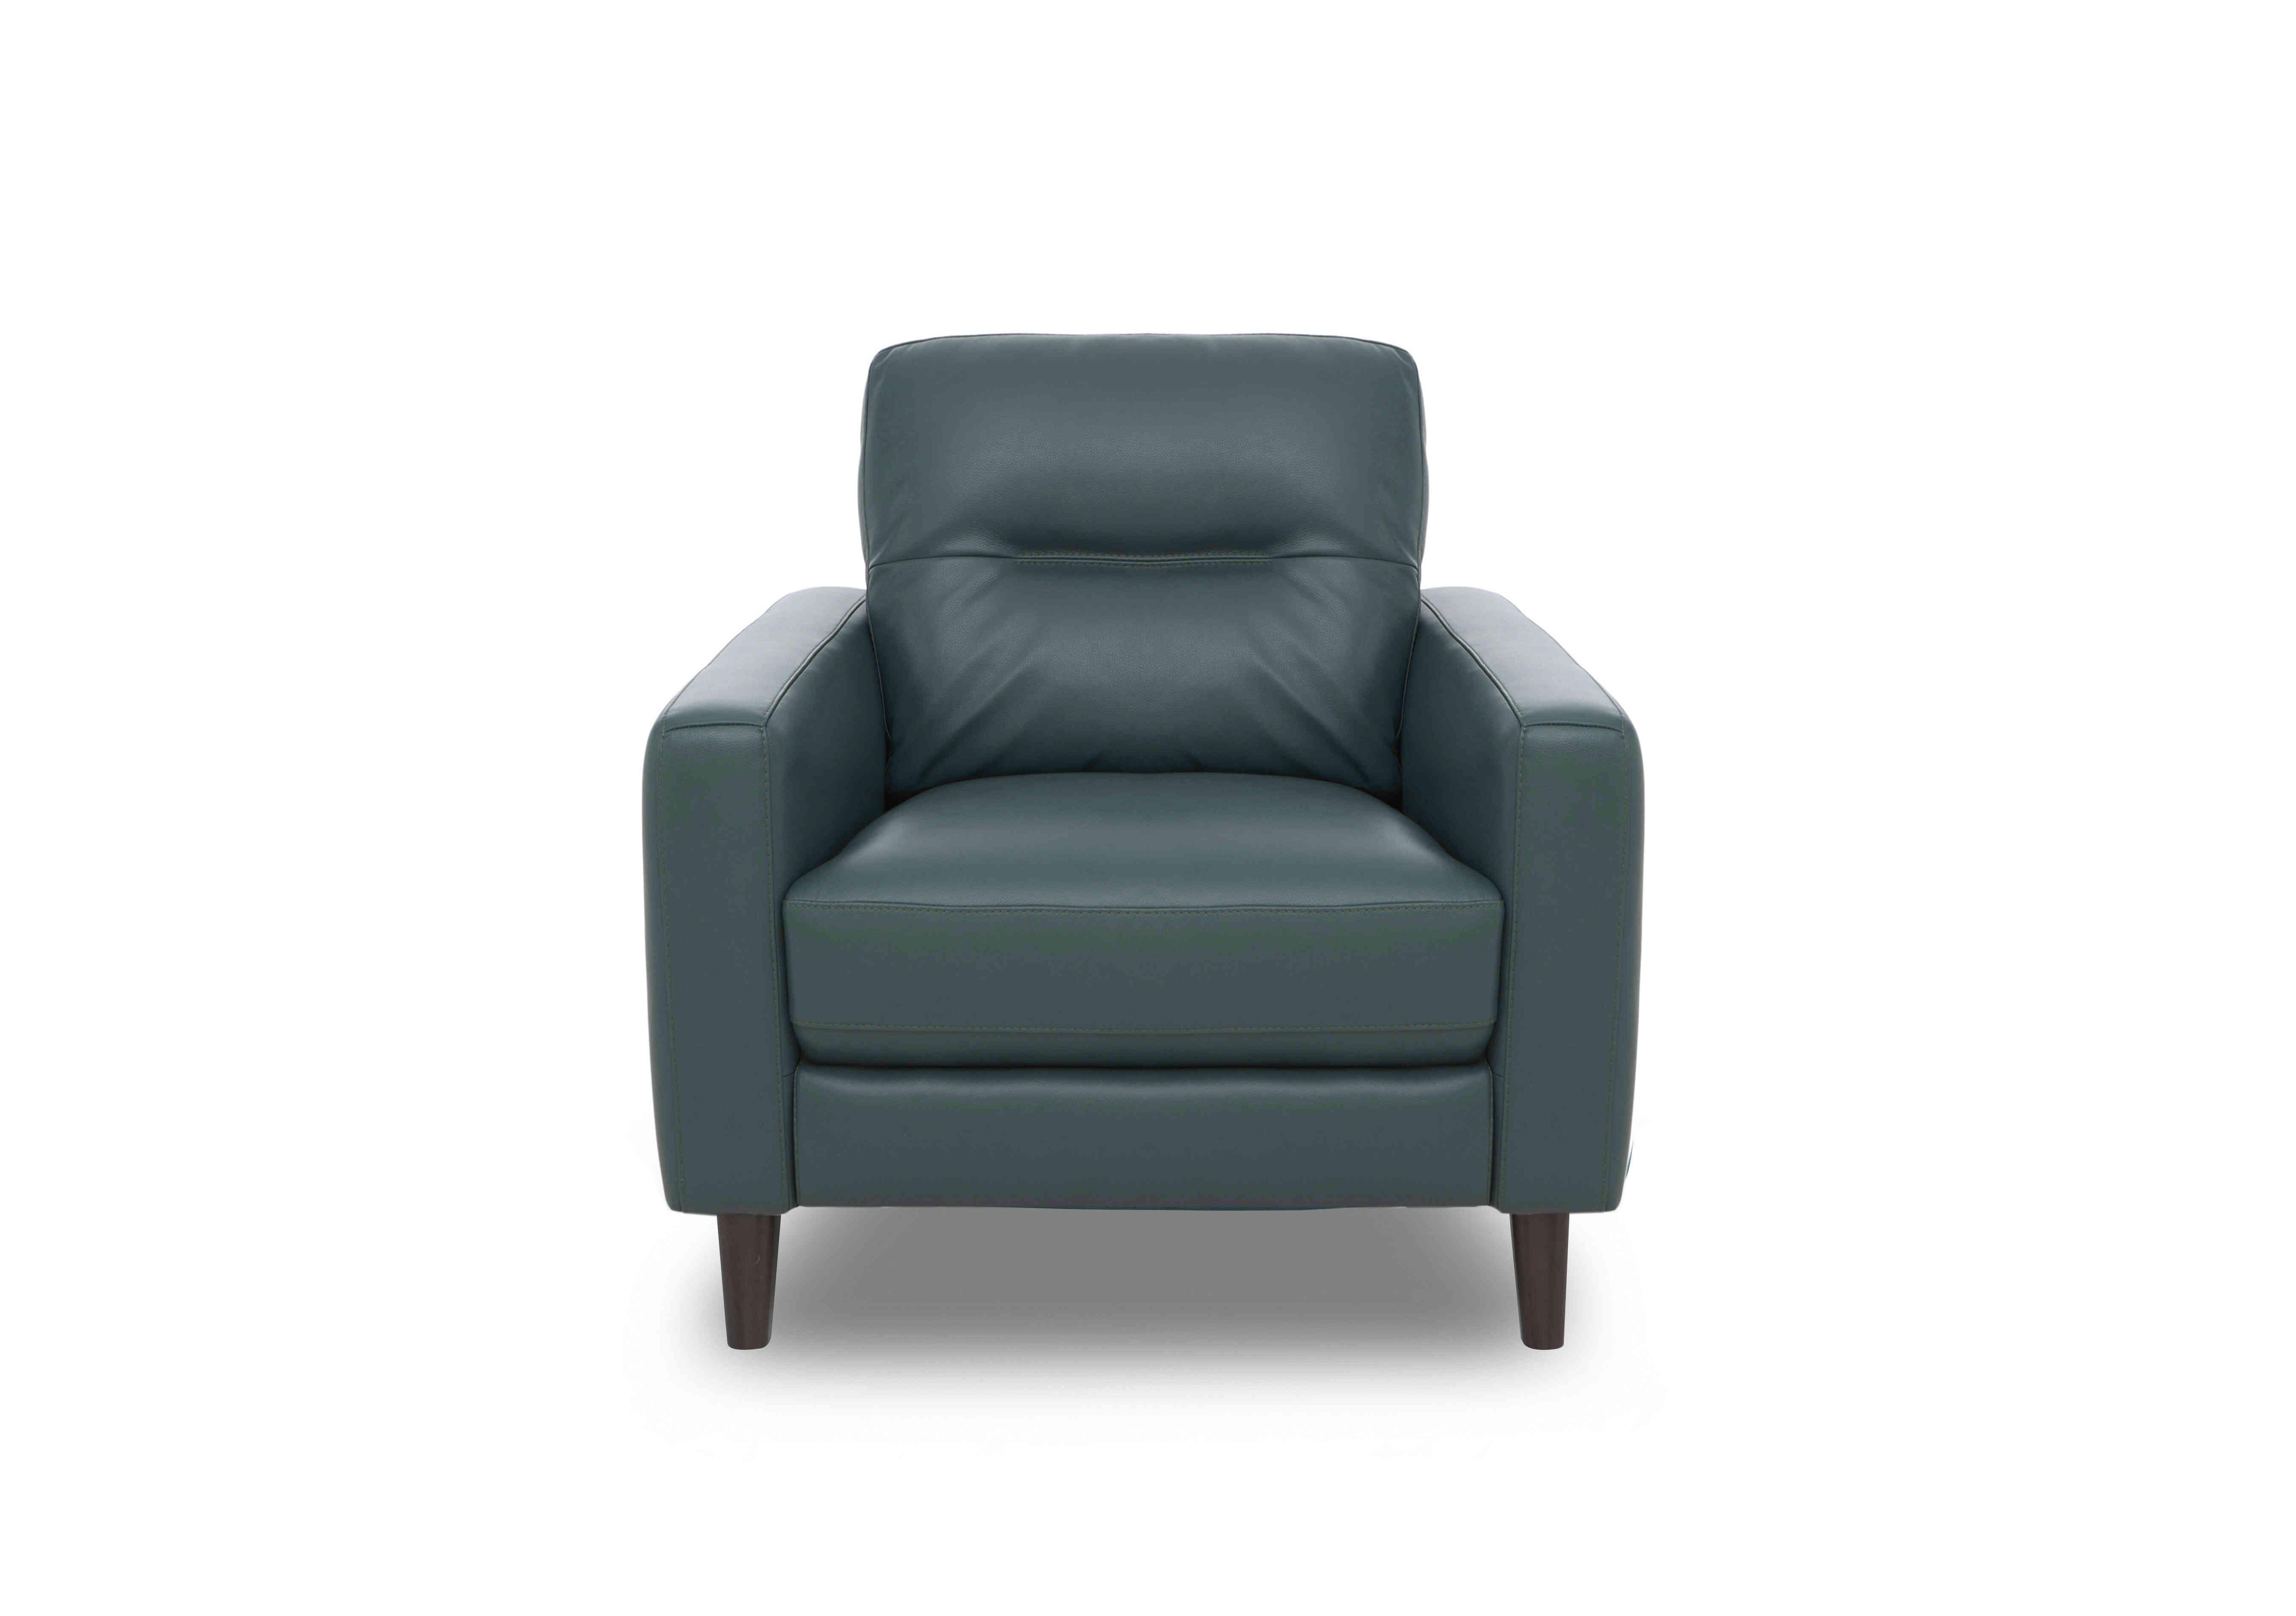 Jules Leather Chair in Bv-301e Lake Green on Furniture Village